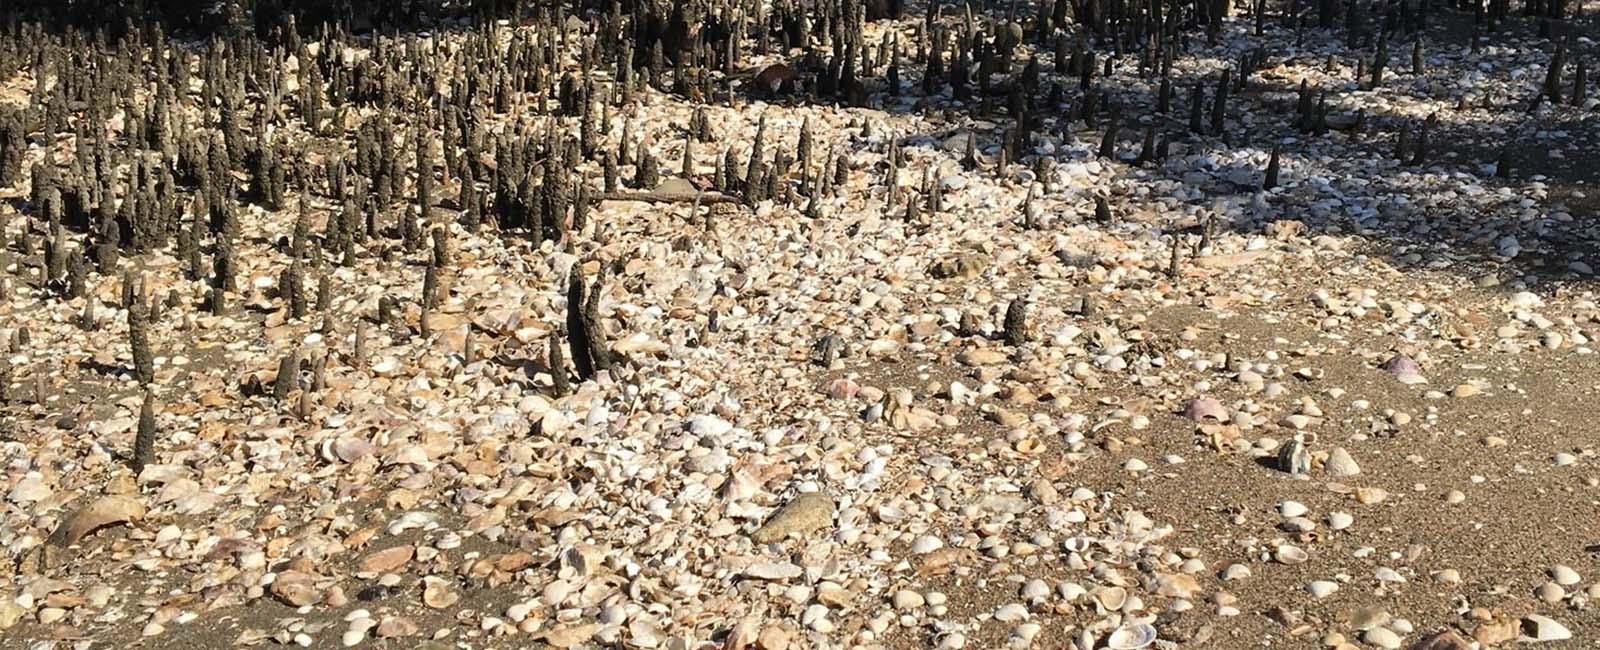 Sandy ground covered in lots of shells with mangrove roots poking up 